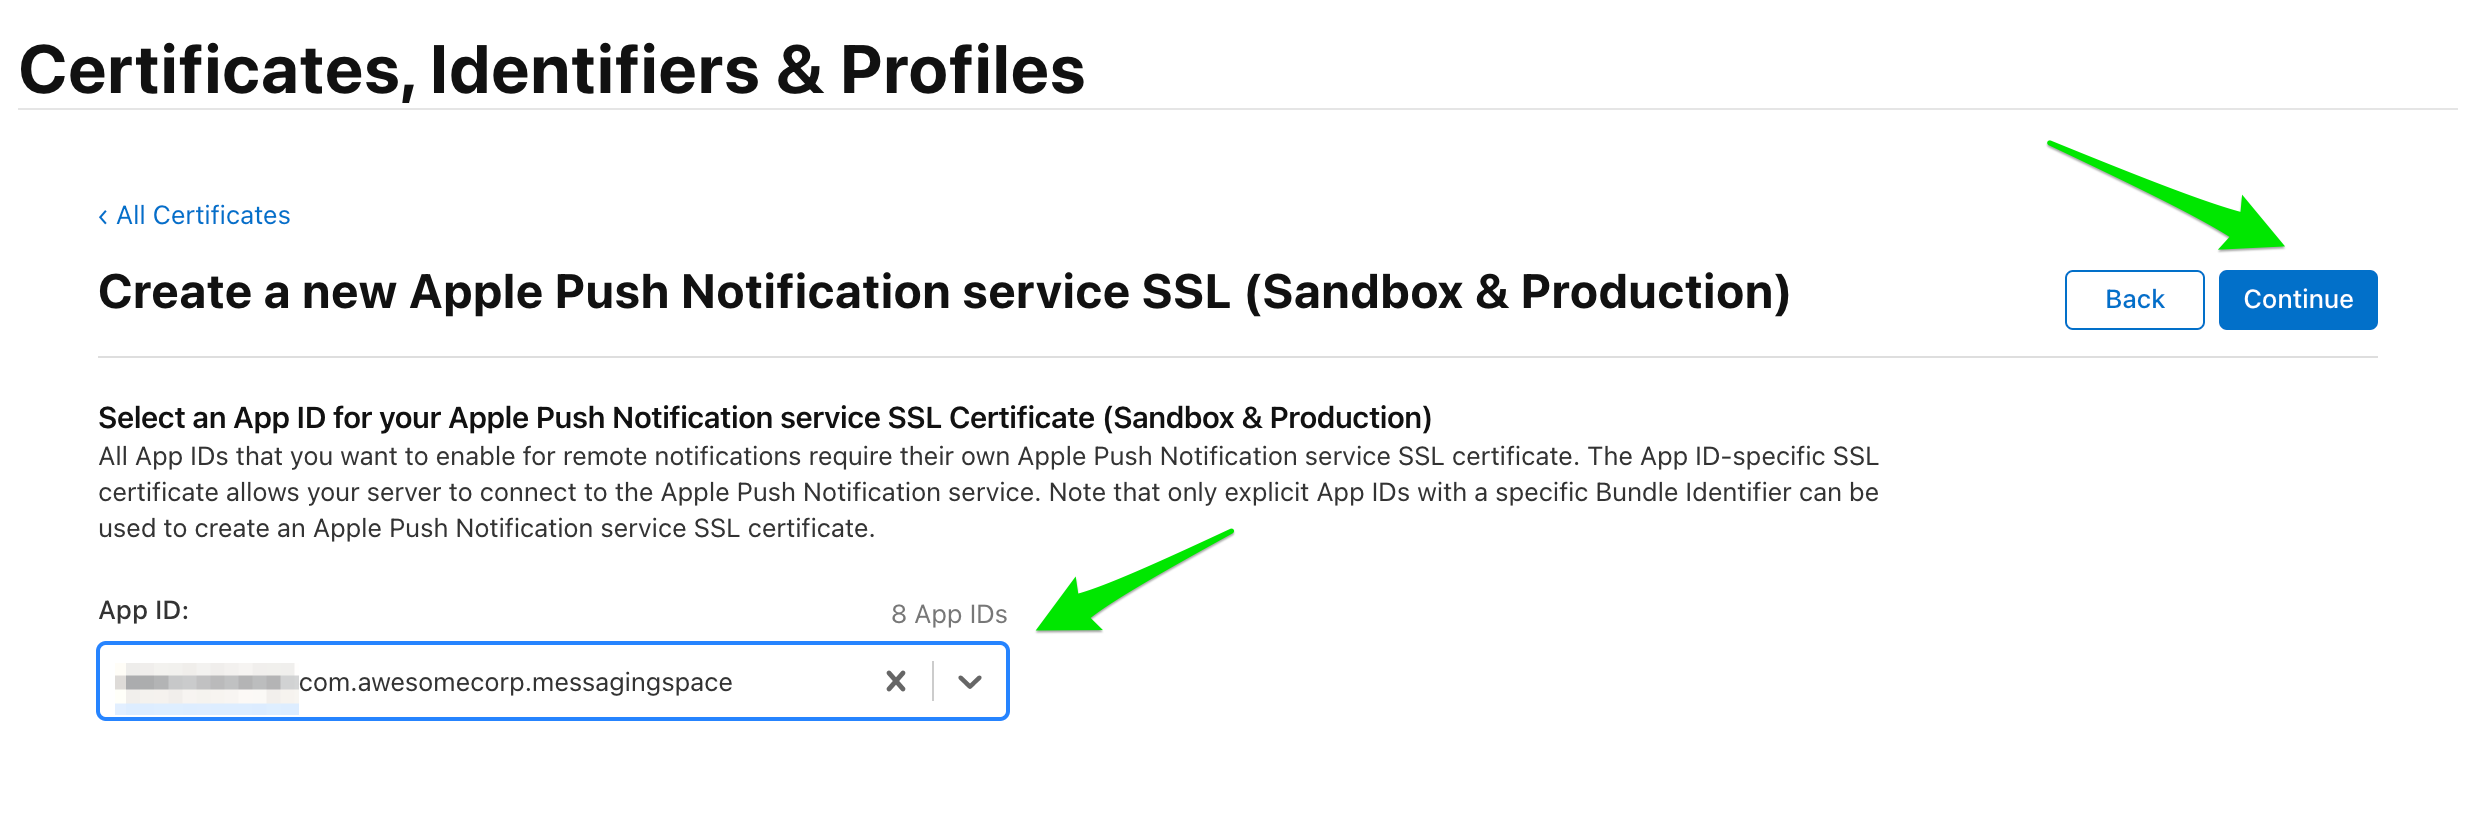 Choose App ID for new push certificate